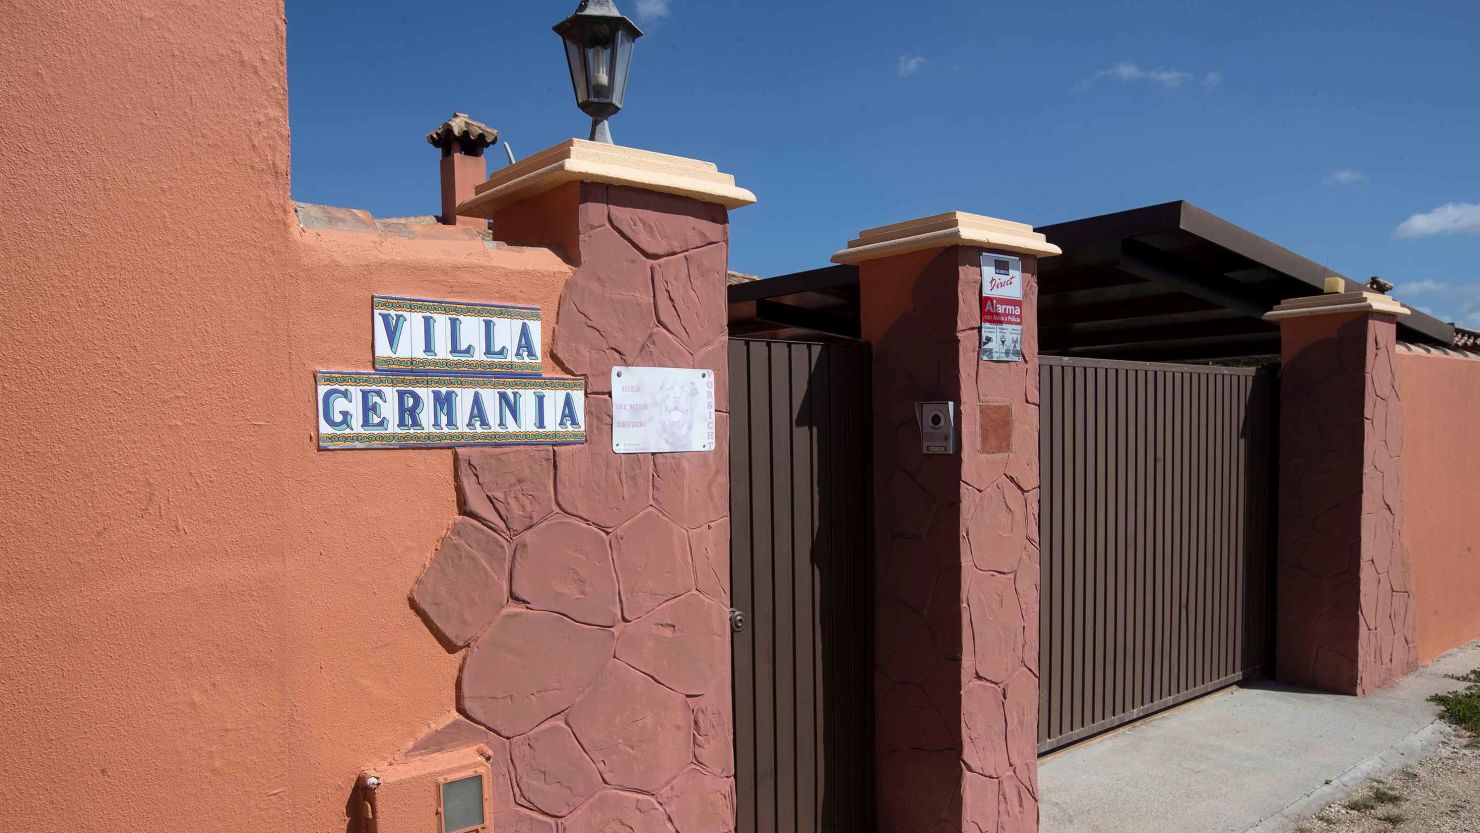 The entrance of the care home in Chiclana de la Frontera, Spain, where owners allegedly kept senior citizens locked up and fed through tubes.